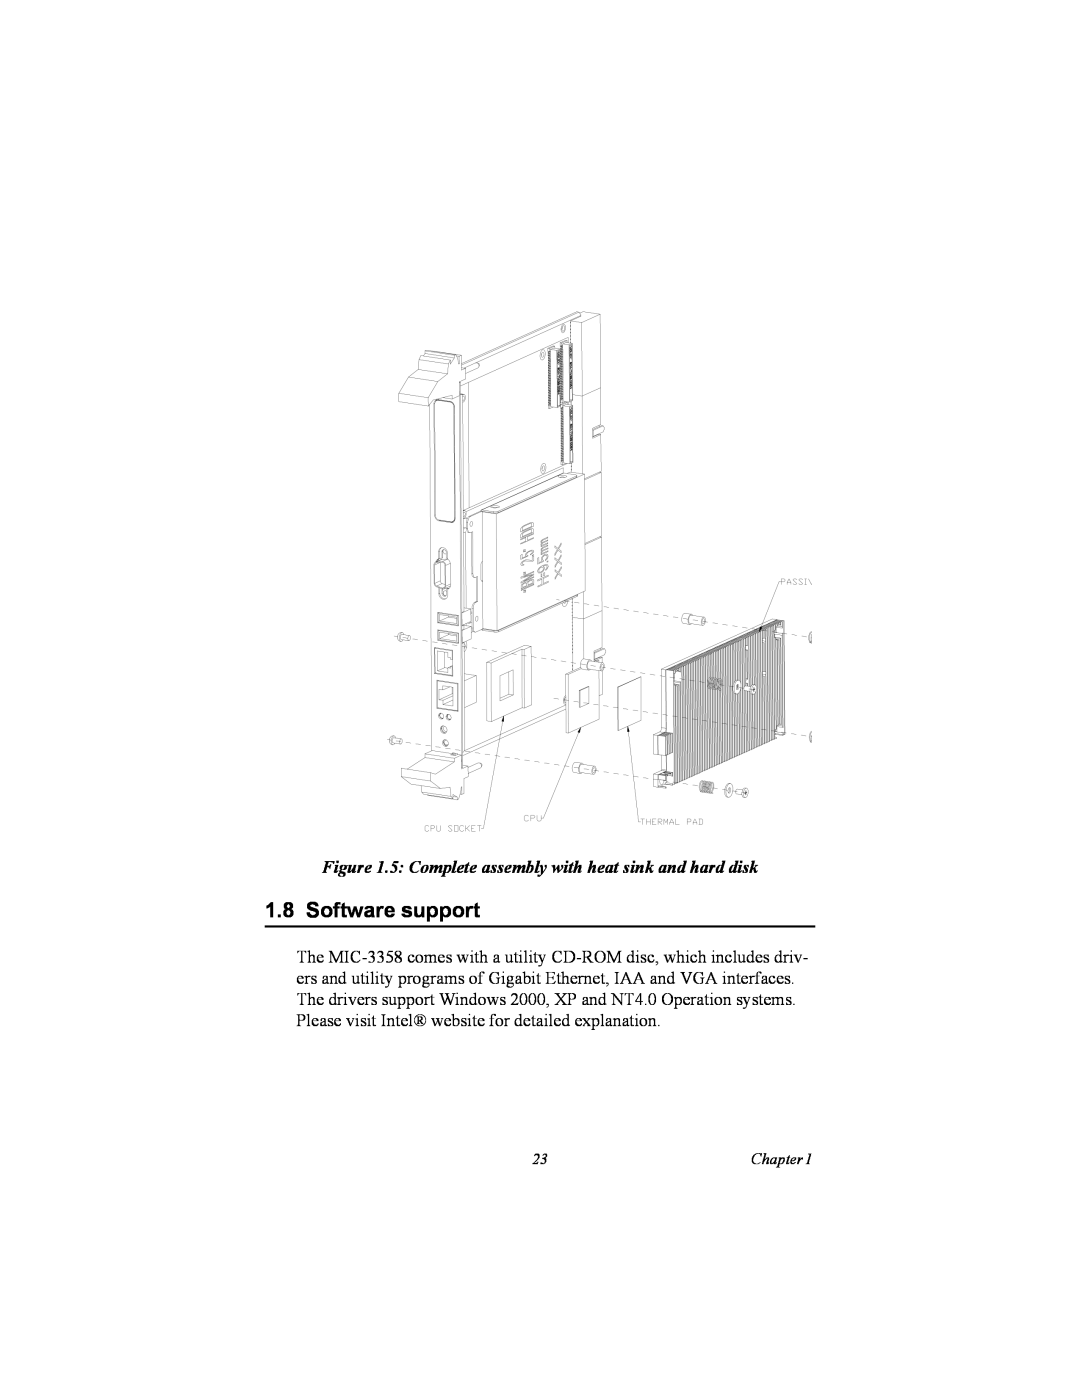 Intel MIC-3358 user manual Software support, 5 Complete assembly with heat sink and hard disk 